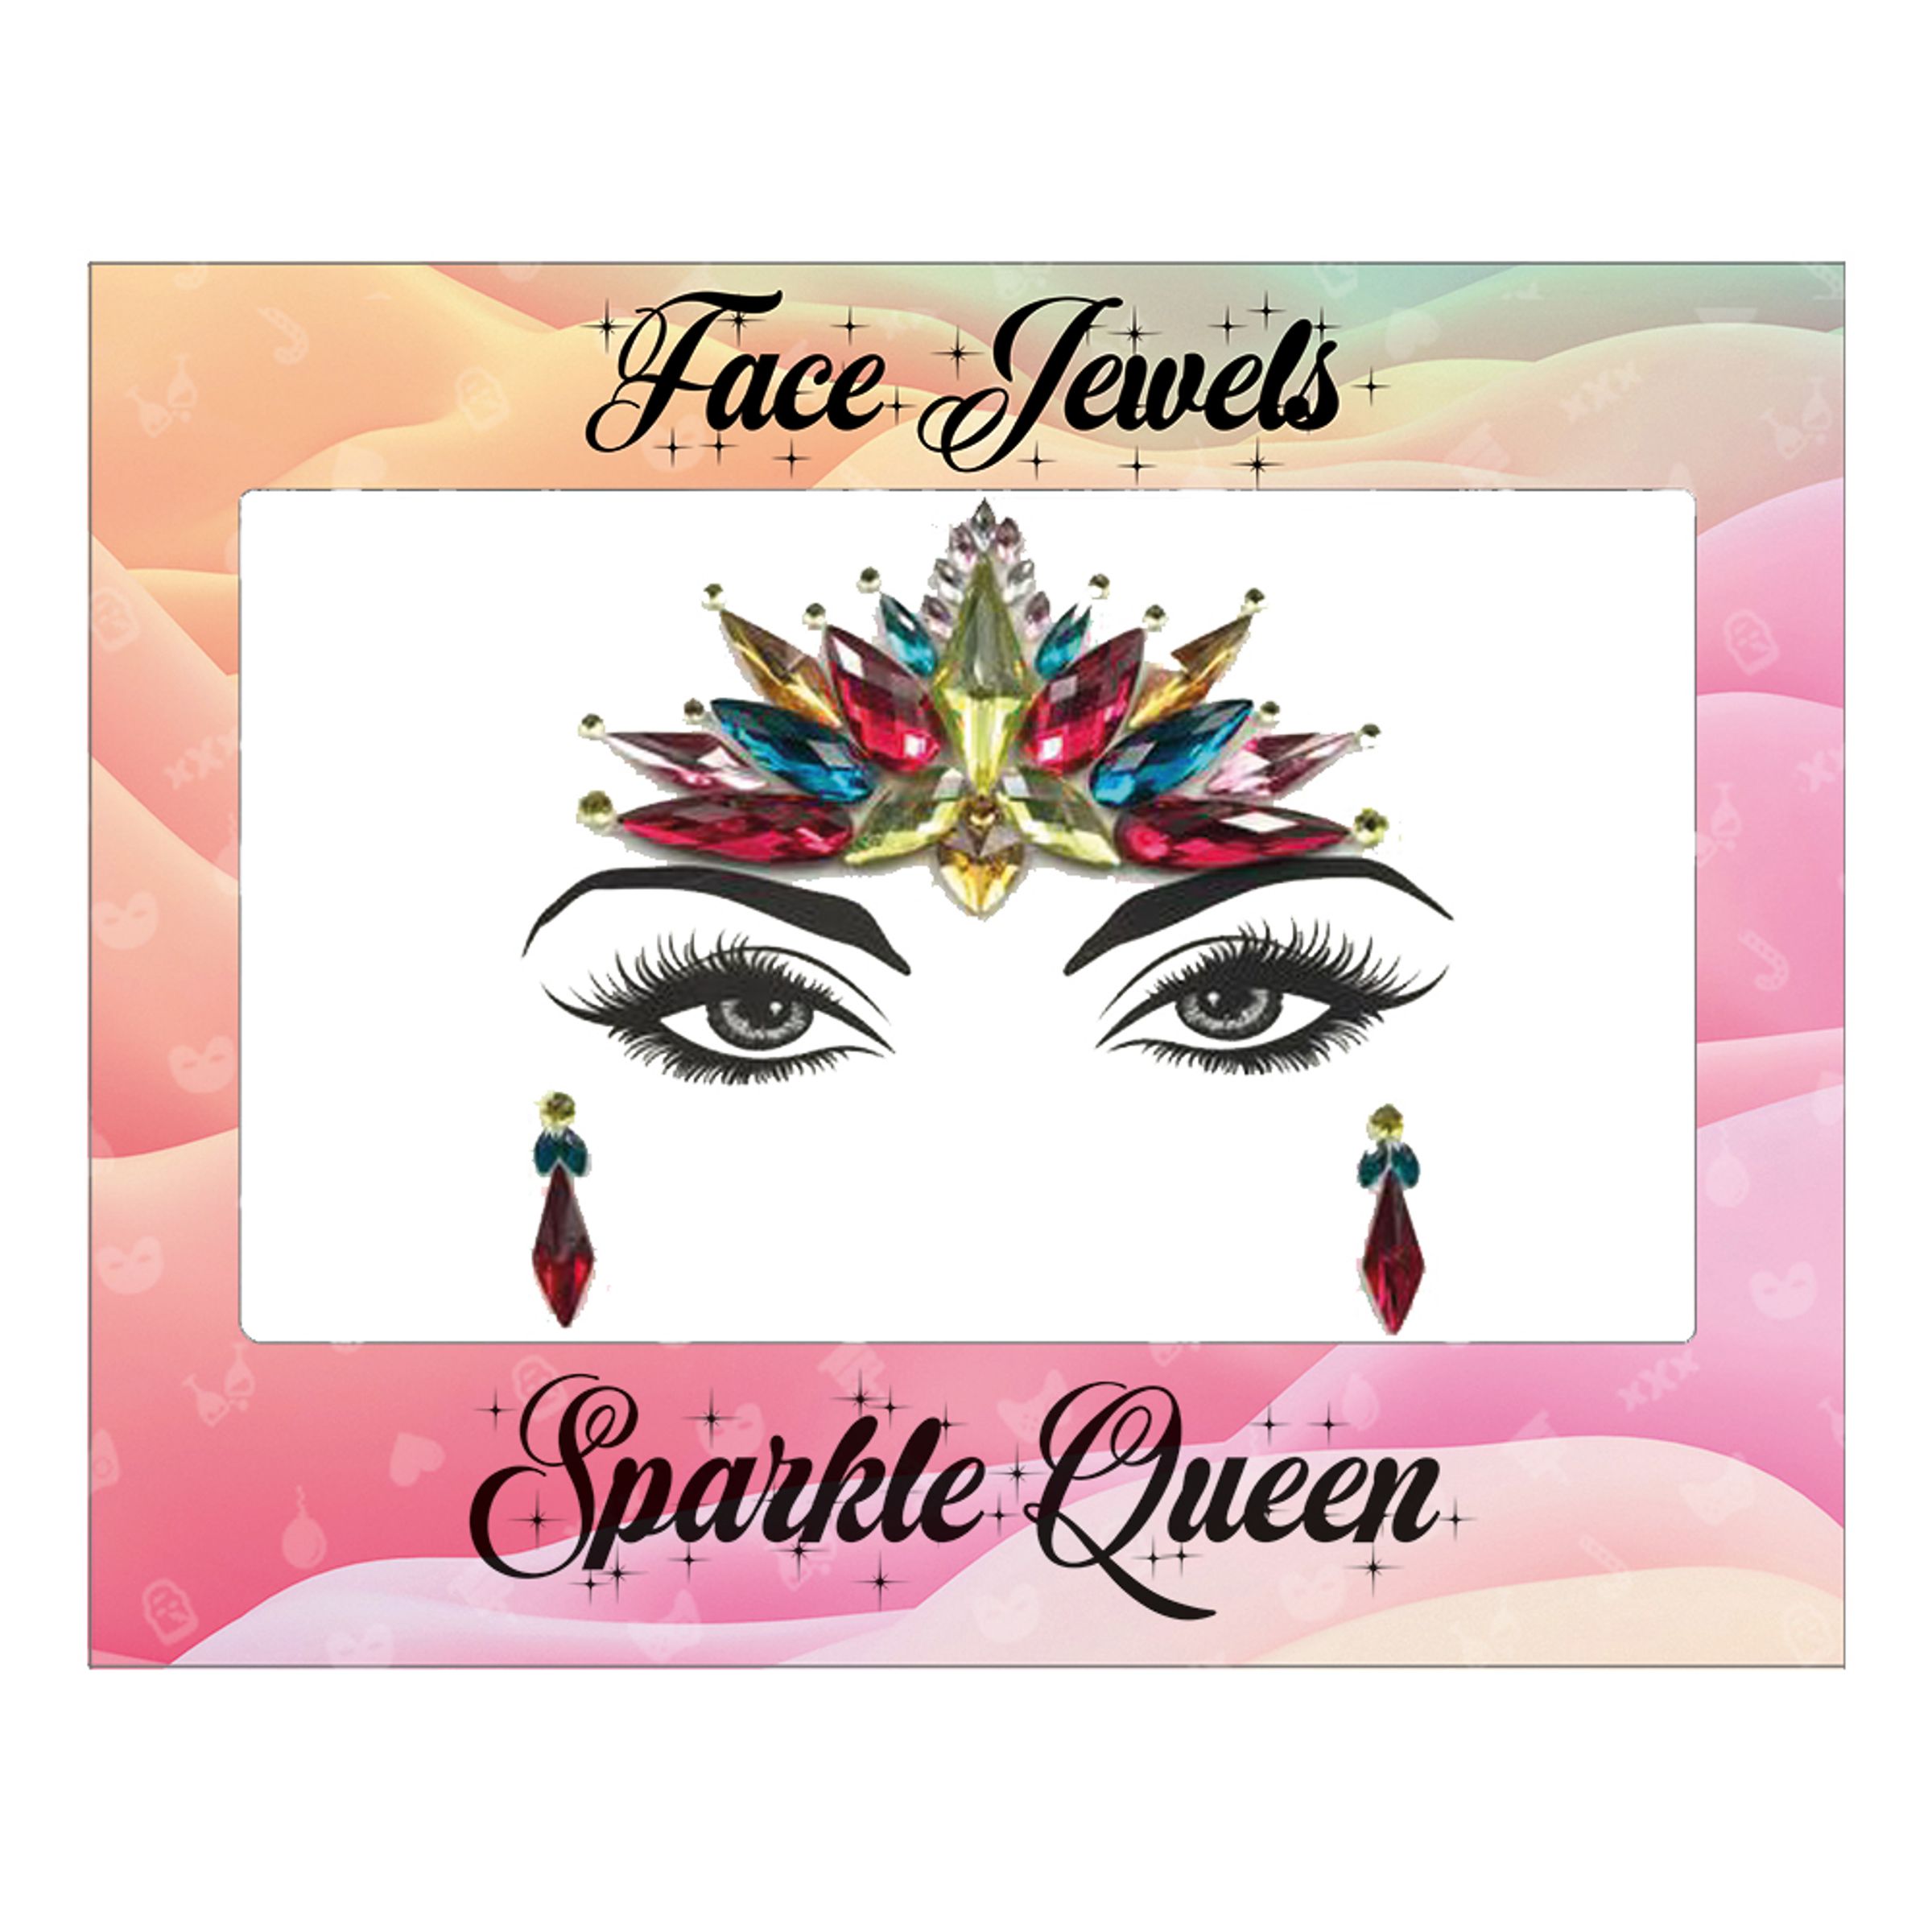 Läs mer om Face Jewels Sparkle Coco